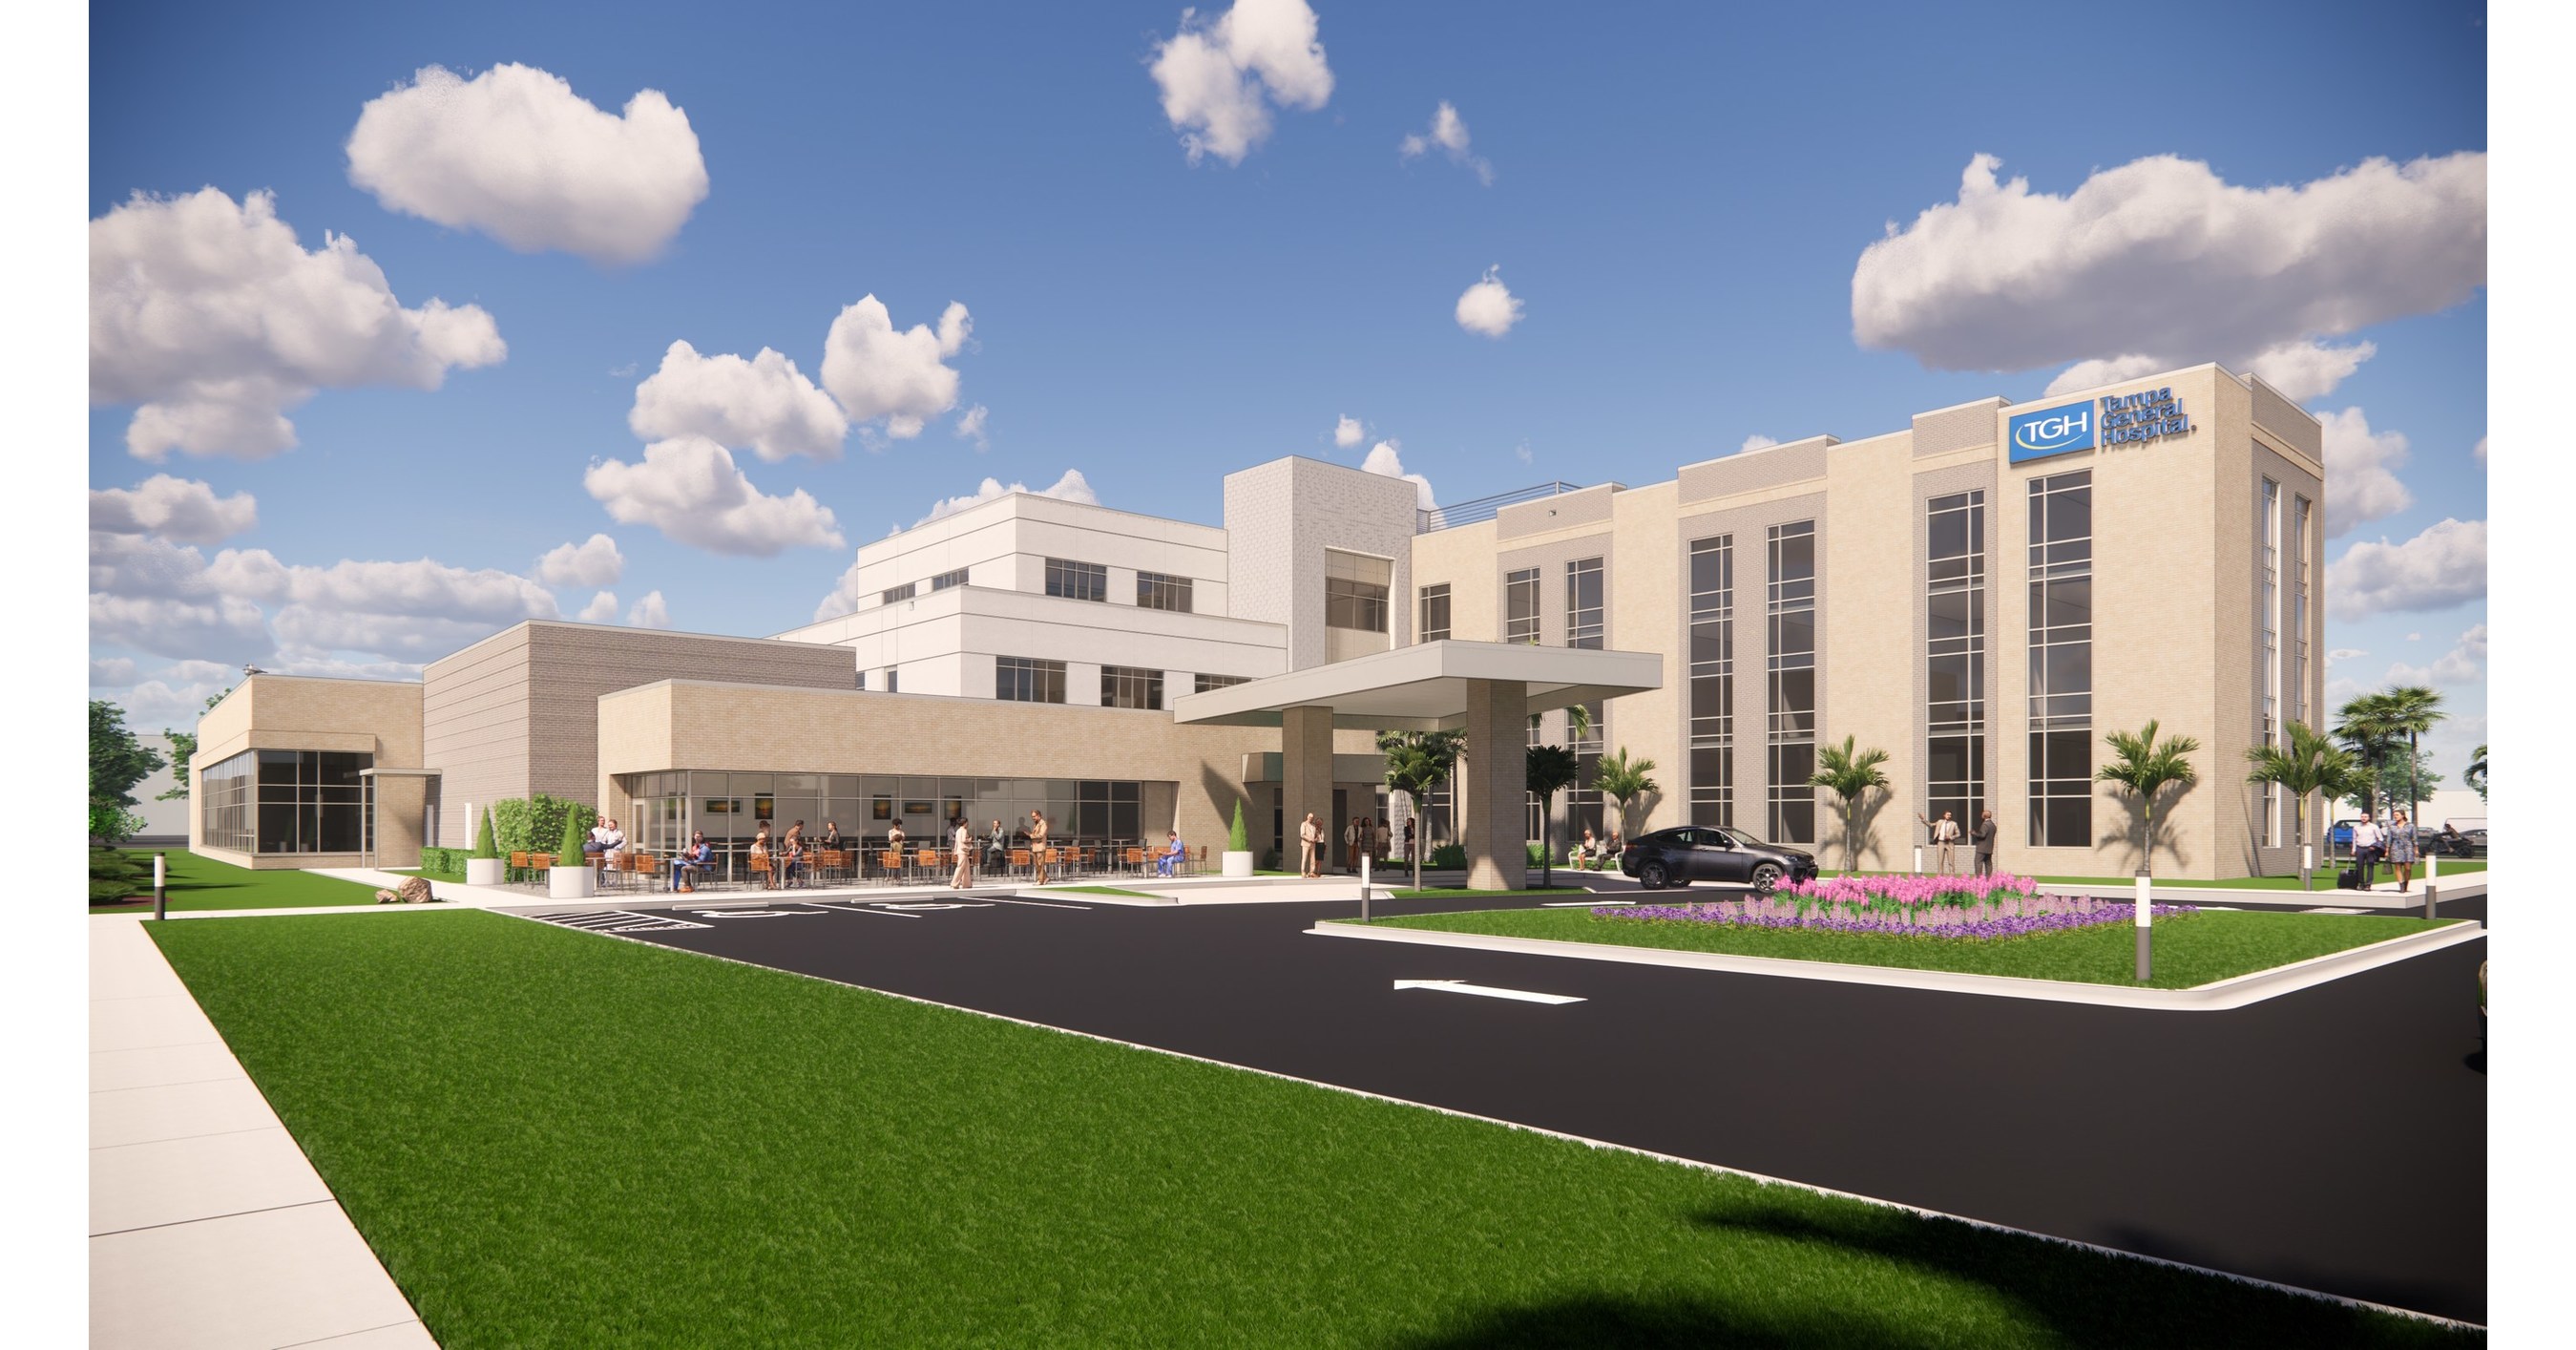 Tampa General Hospital and Kindred Healthcare Announce Partnership and  Plans for a New Inpatient Rehabilitation Hospital